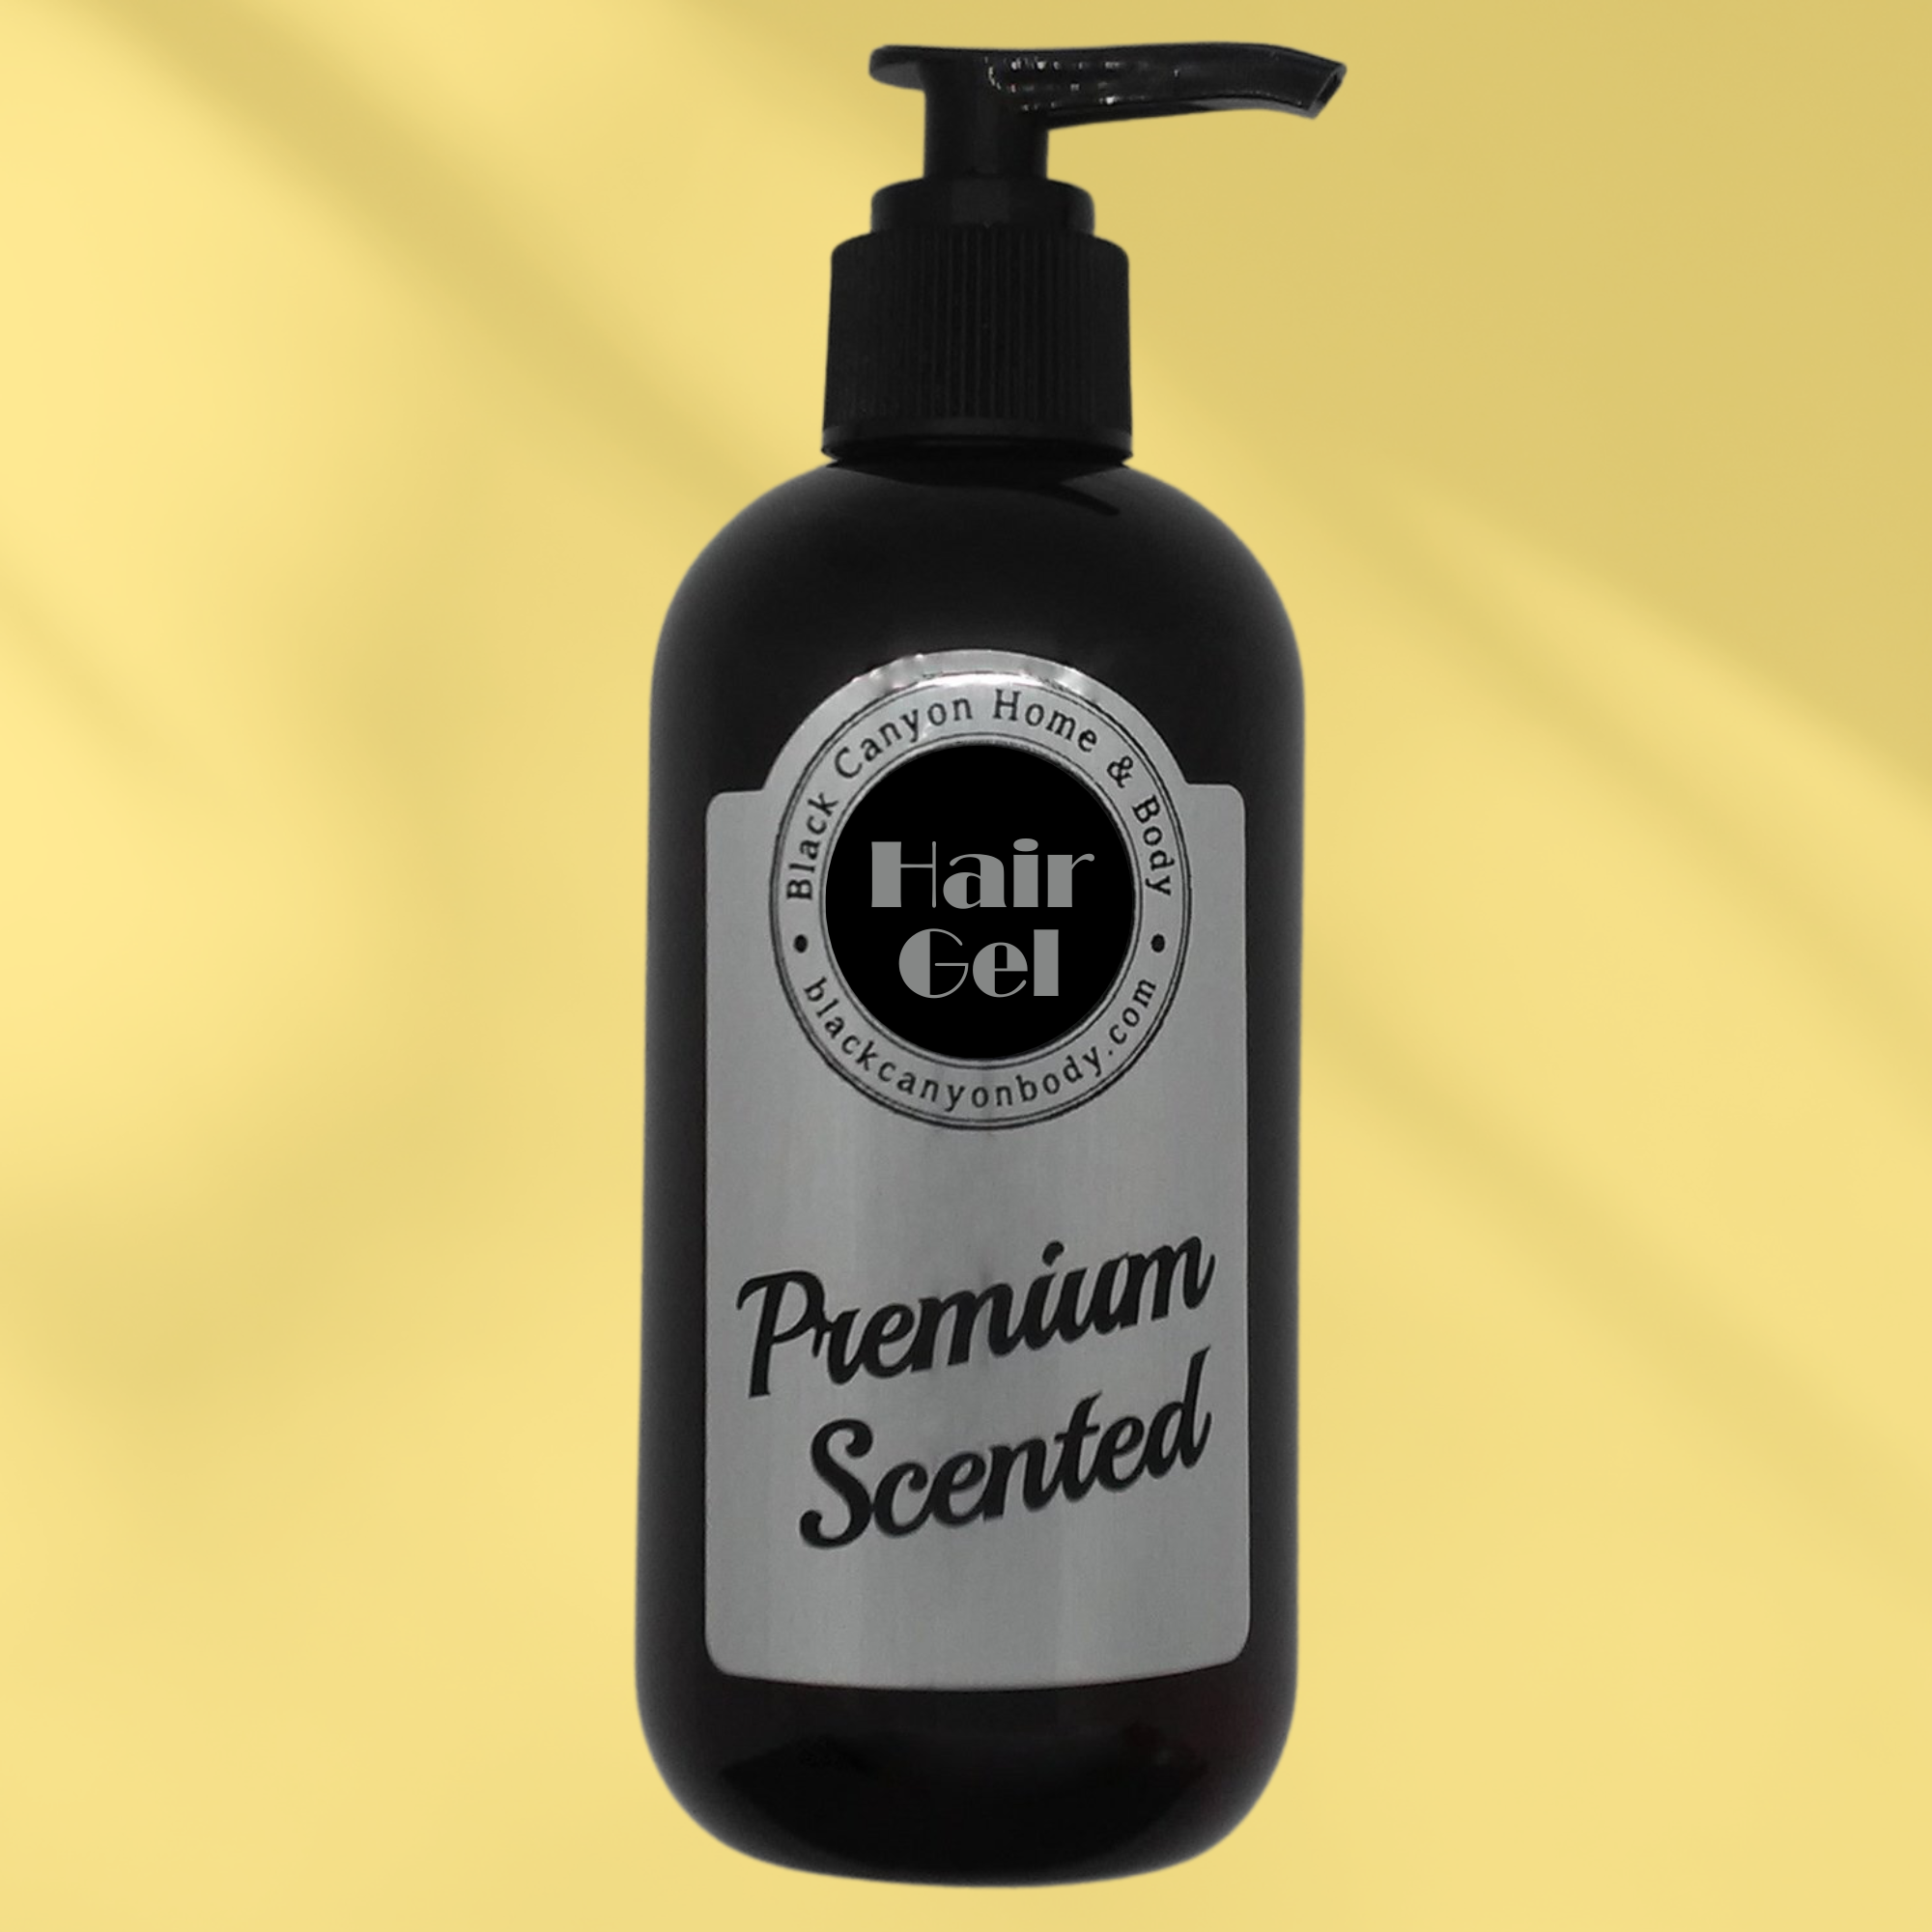 Black Canyon Frankincense Patchouli Scented Hair Gel